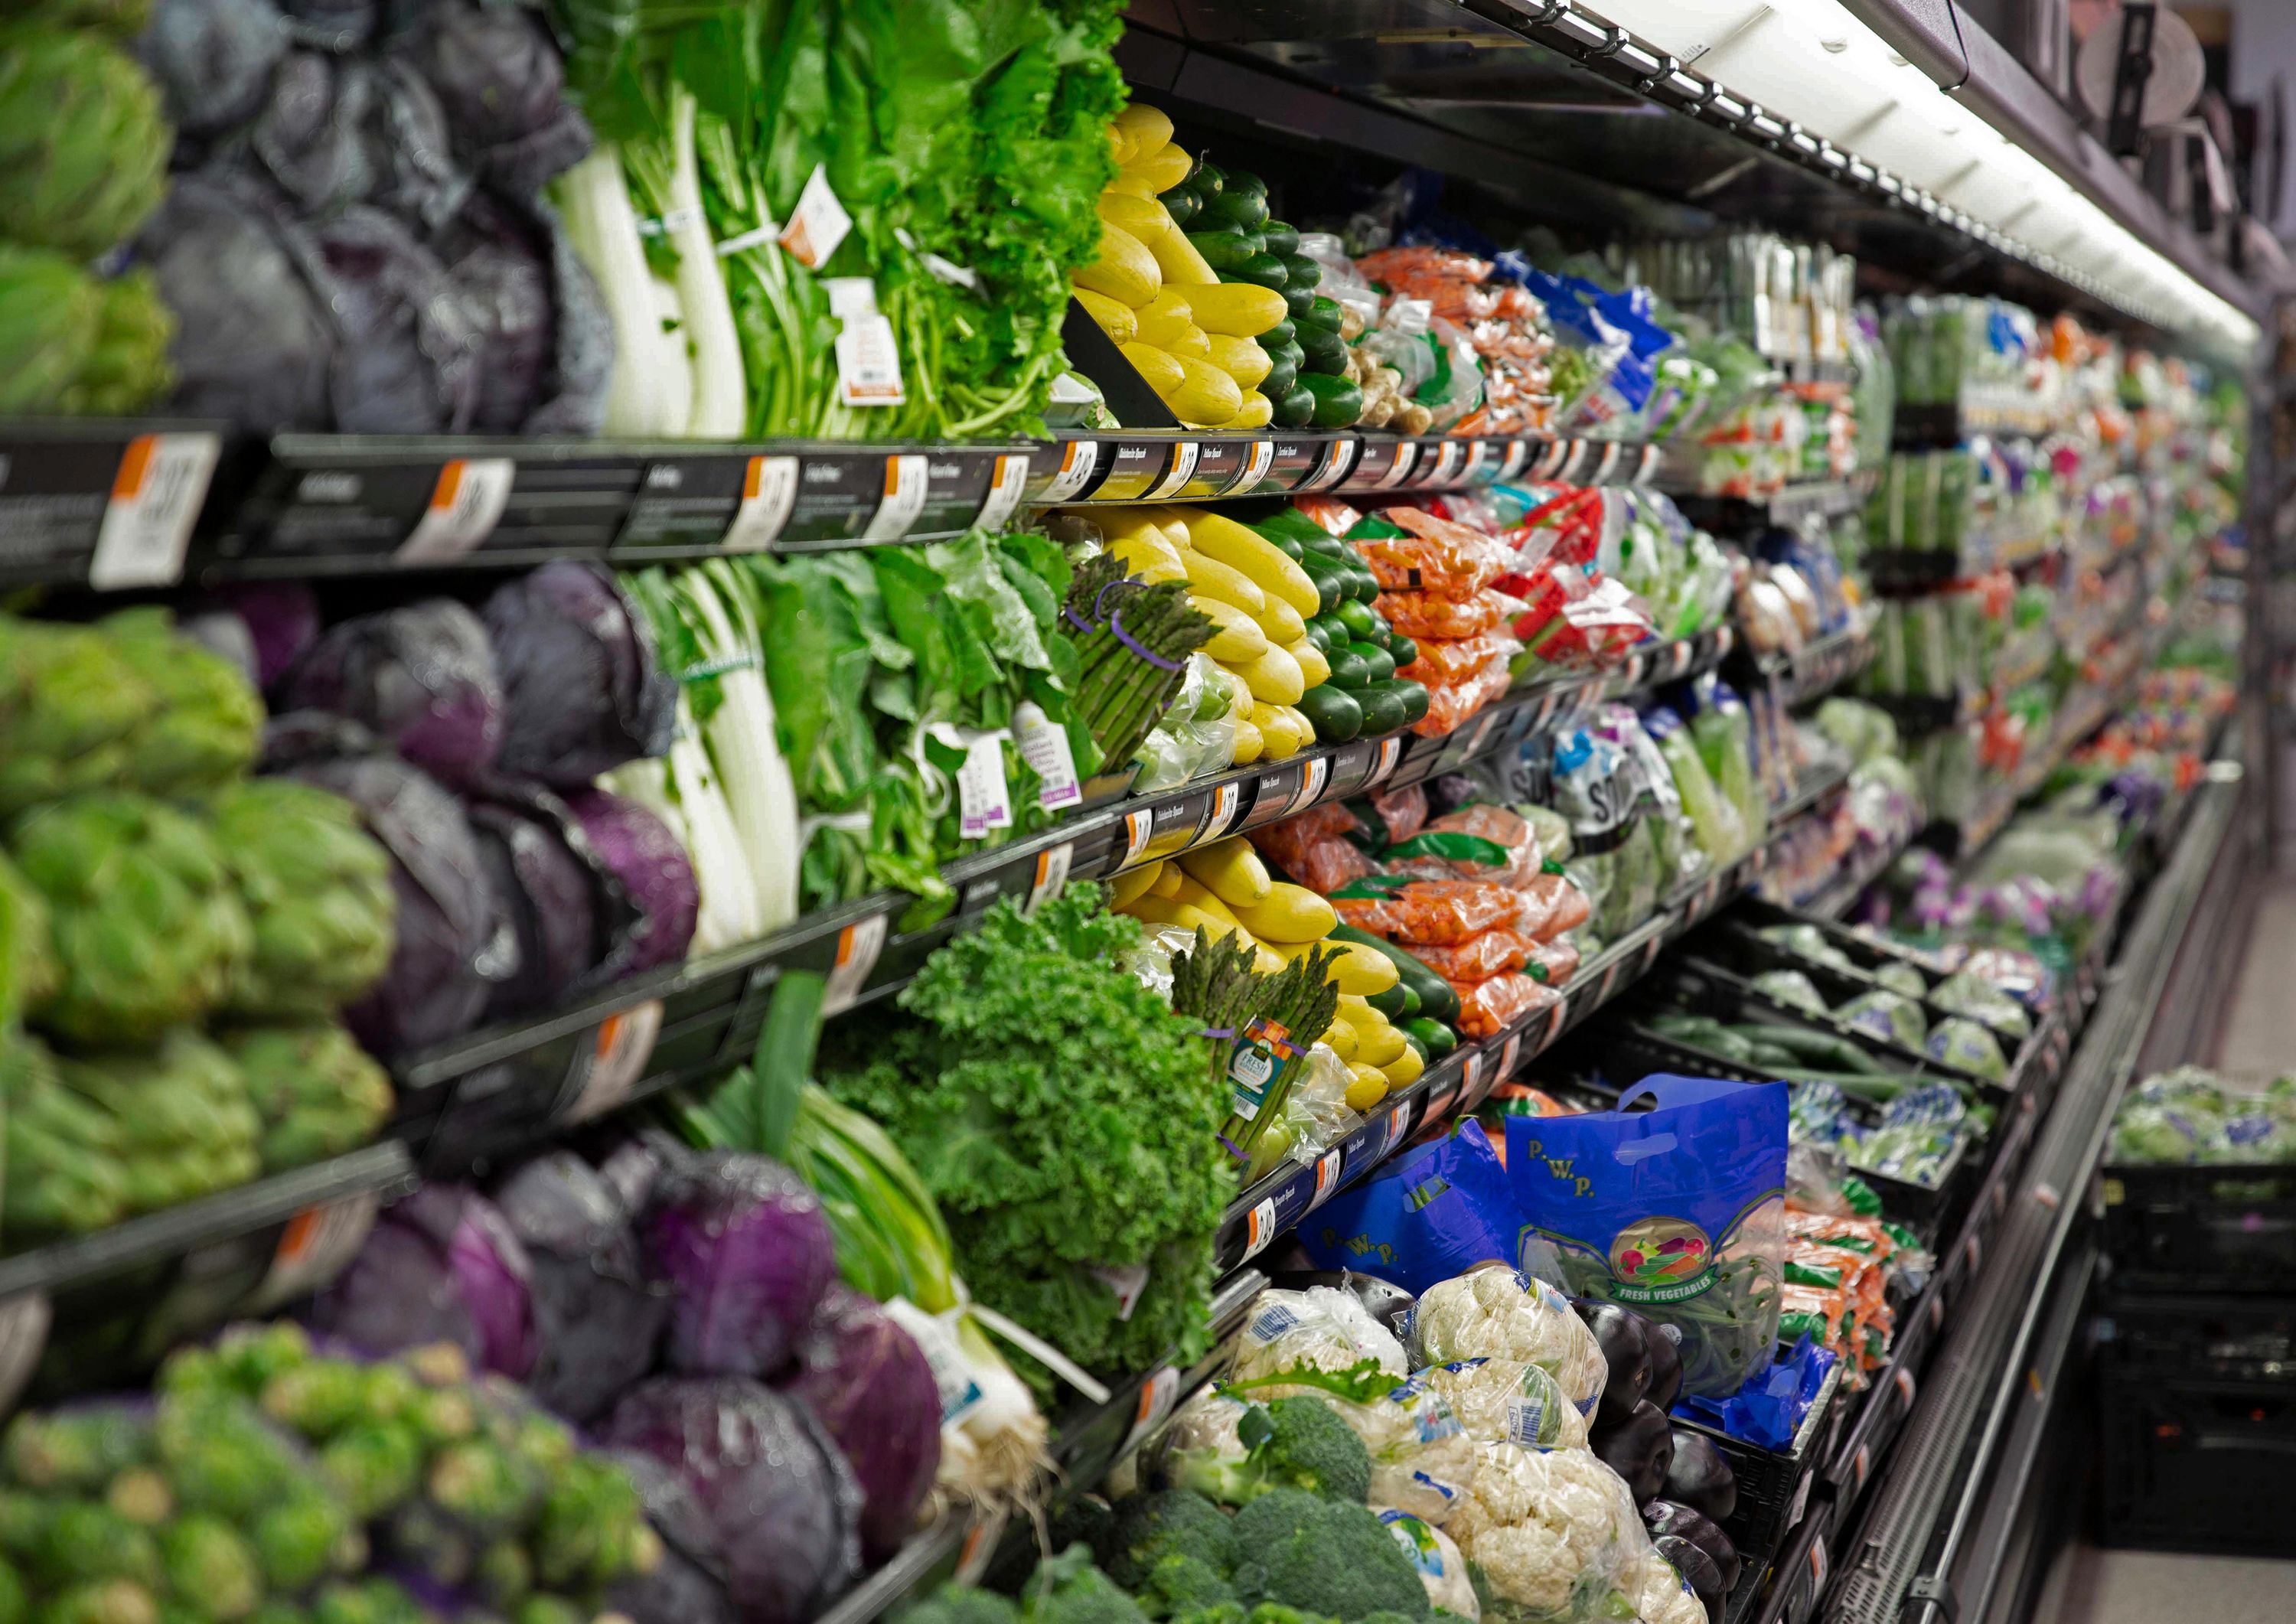 Walmart Is Making This Change in the Produce Aisle